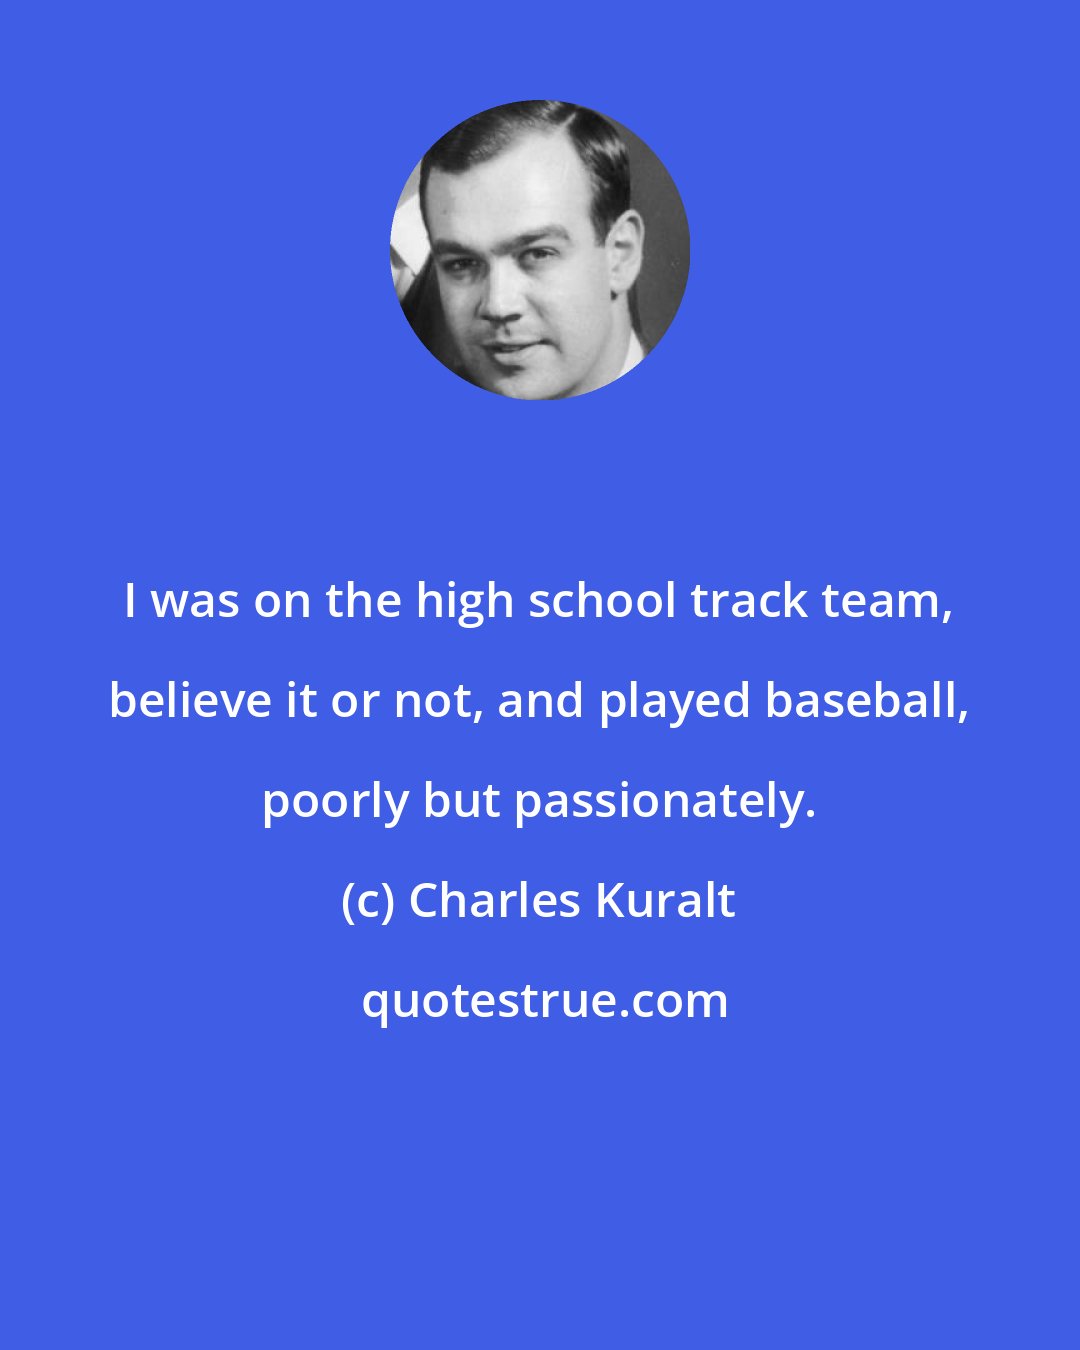 Charles Kuralt: I was on the high school track team, believe it or not, and played baseball, poorly but passionately.